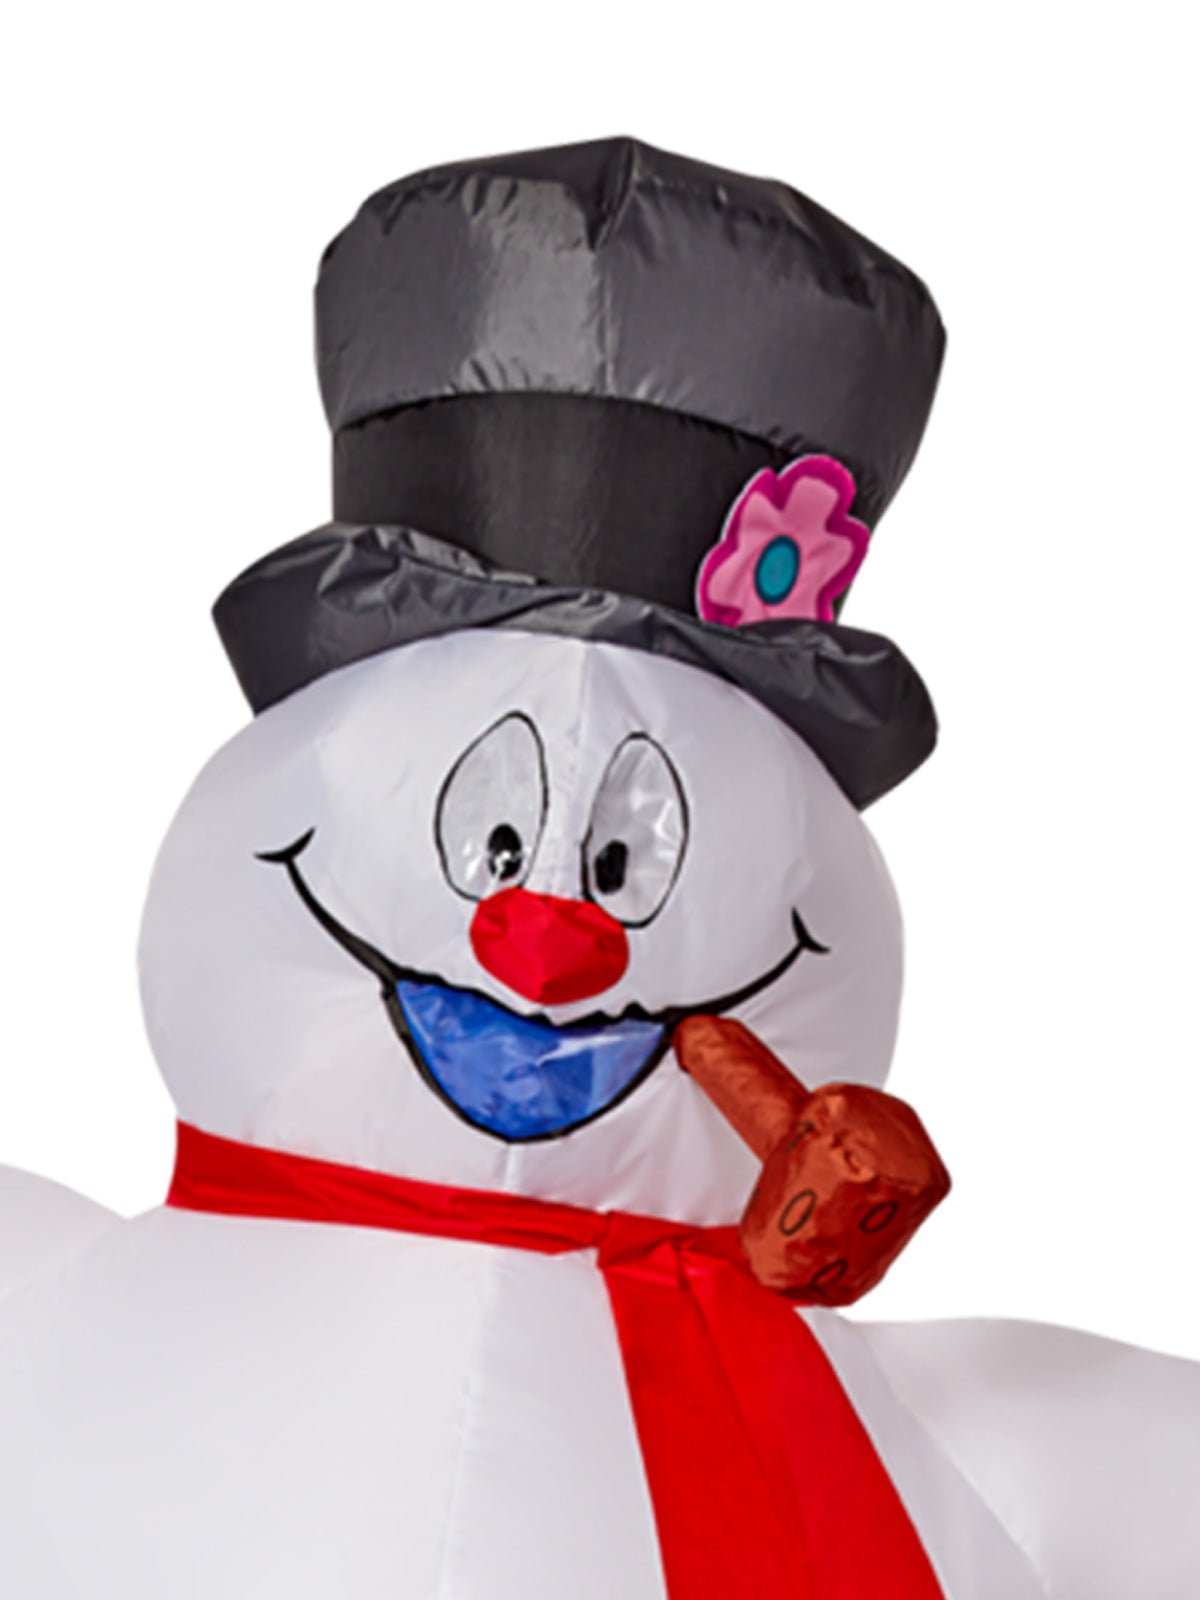 Frosty Snowman Inflatable Costume for Adults